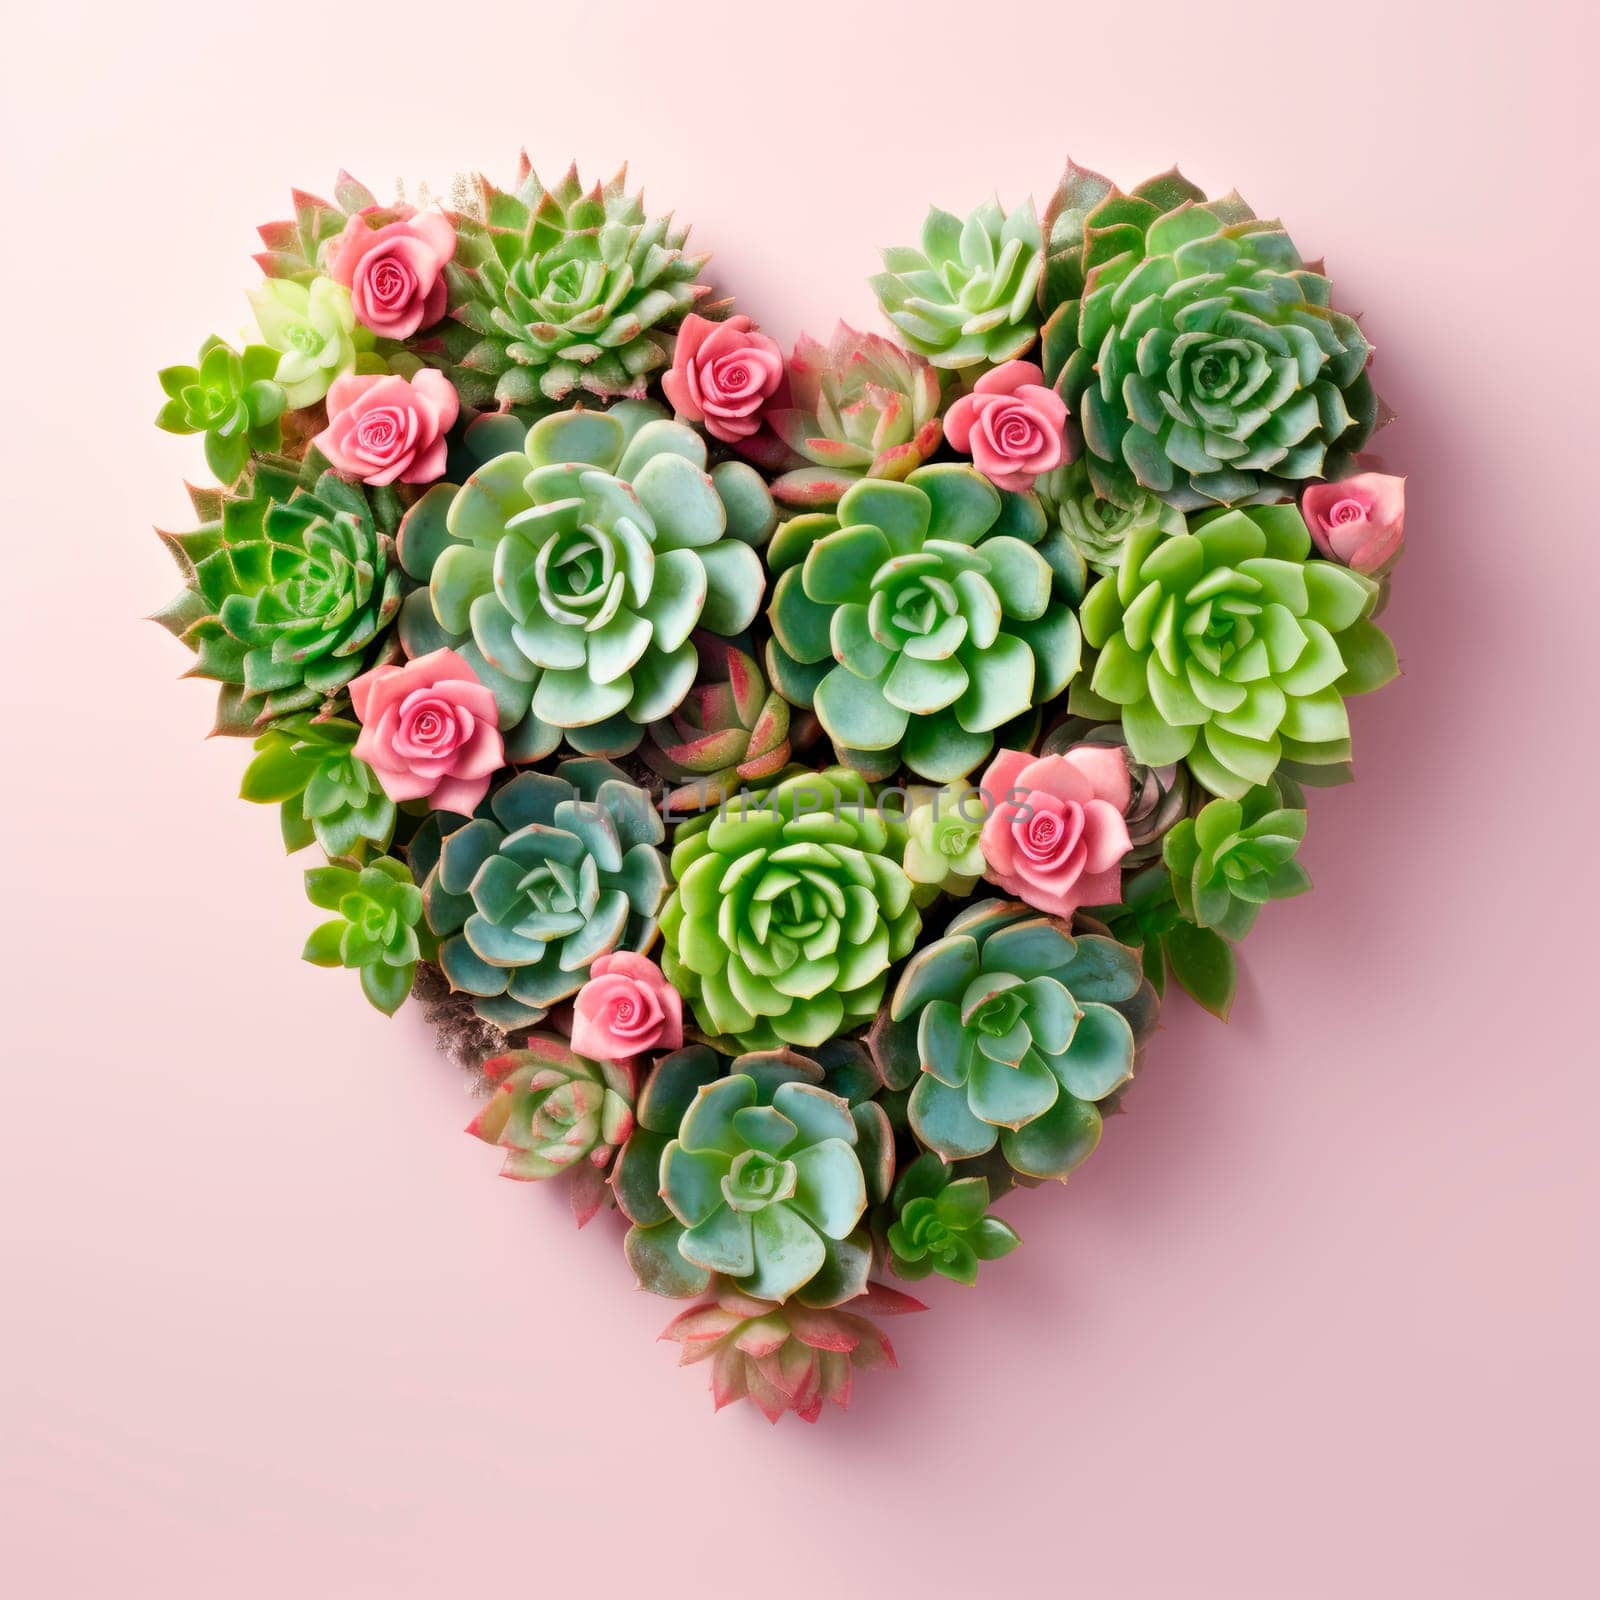 The heart is lined with beautiful succulents on a light pink background by Spirina